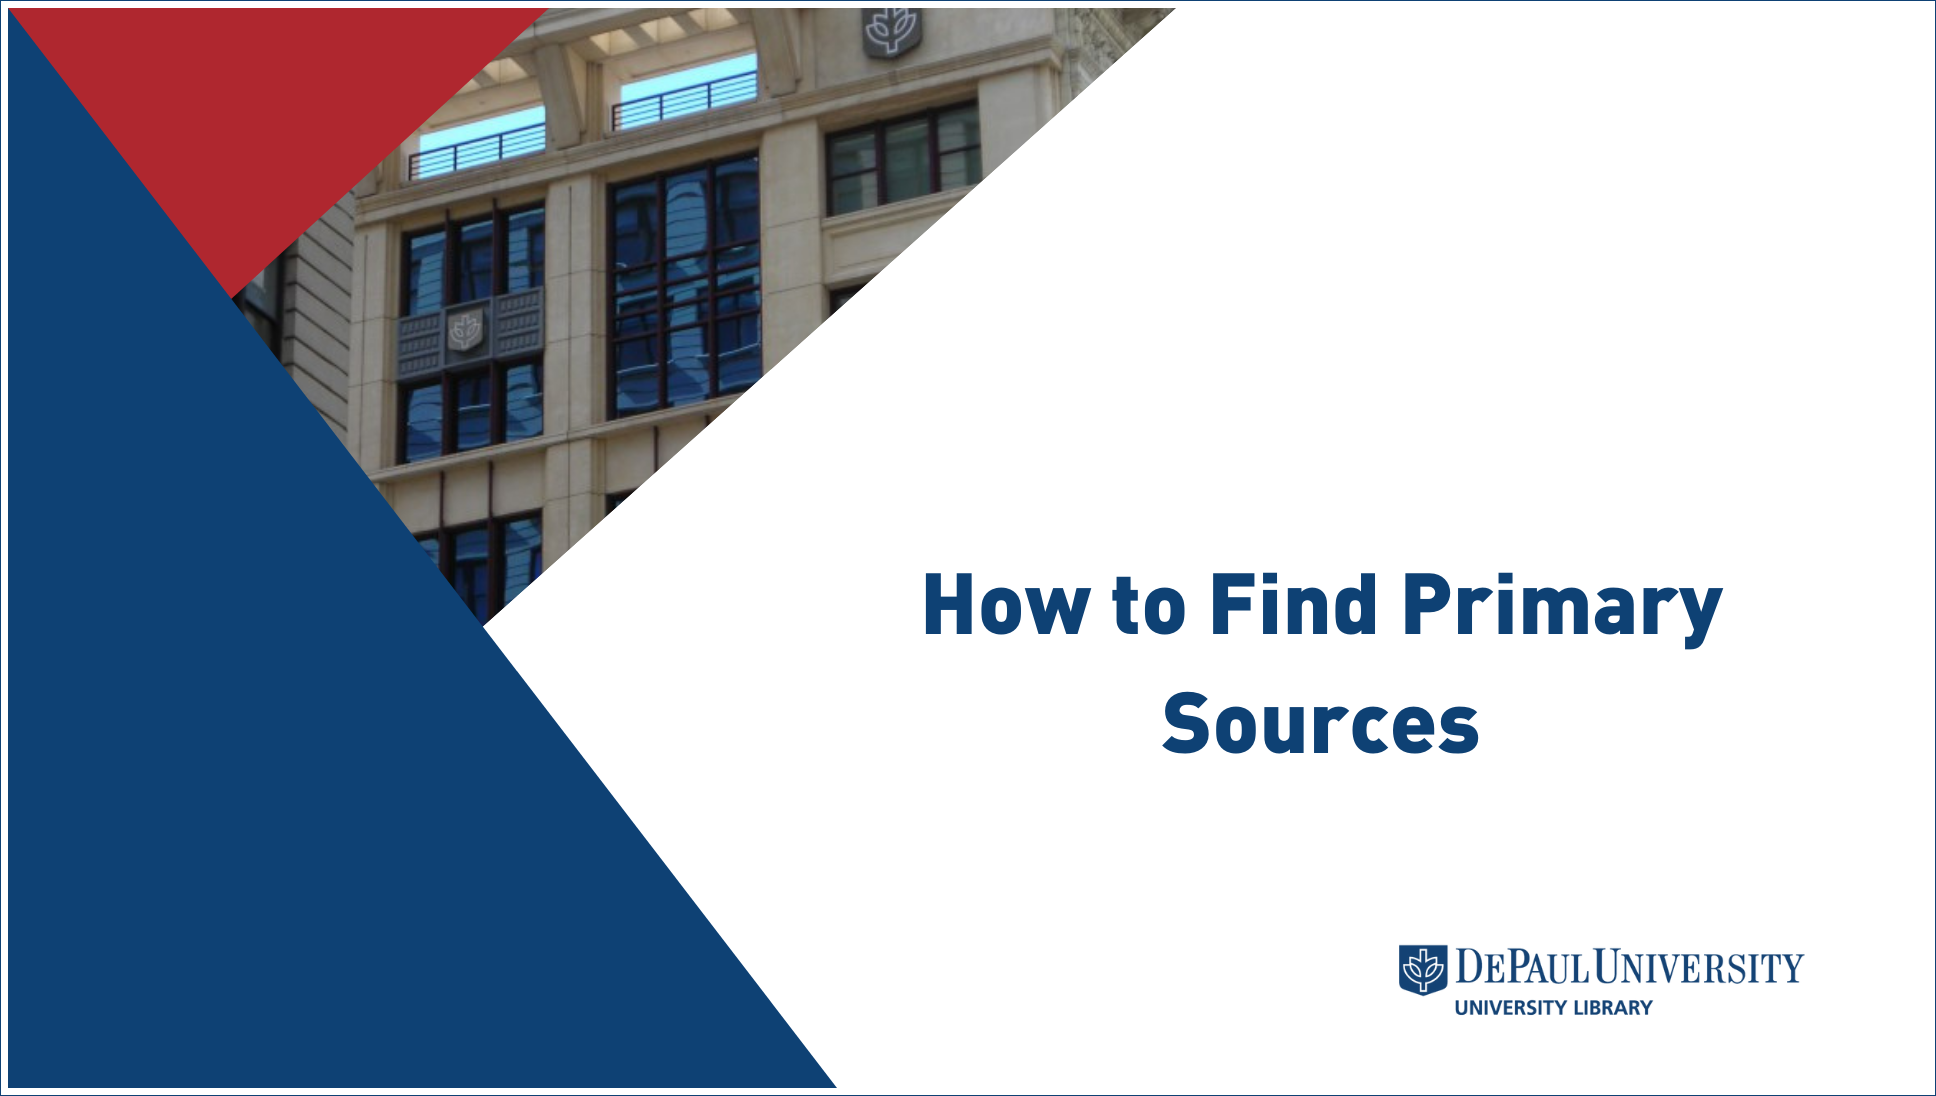 How to Find Primary Sources